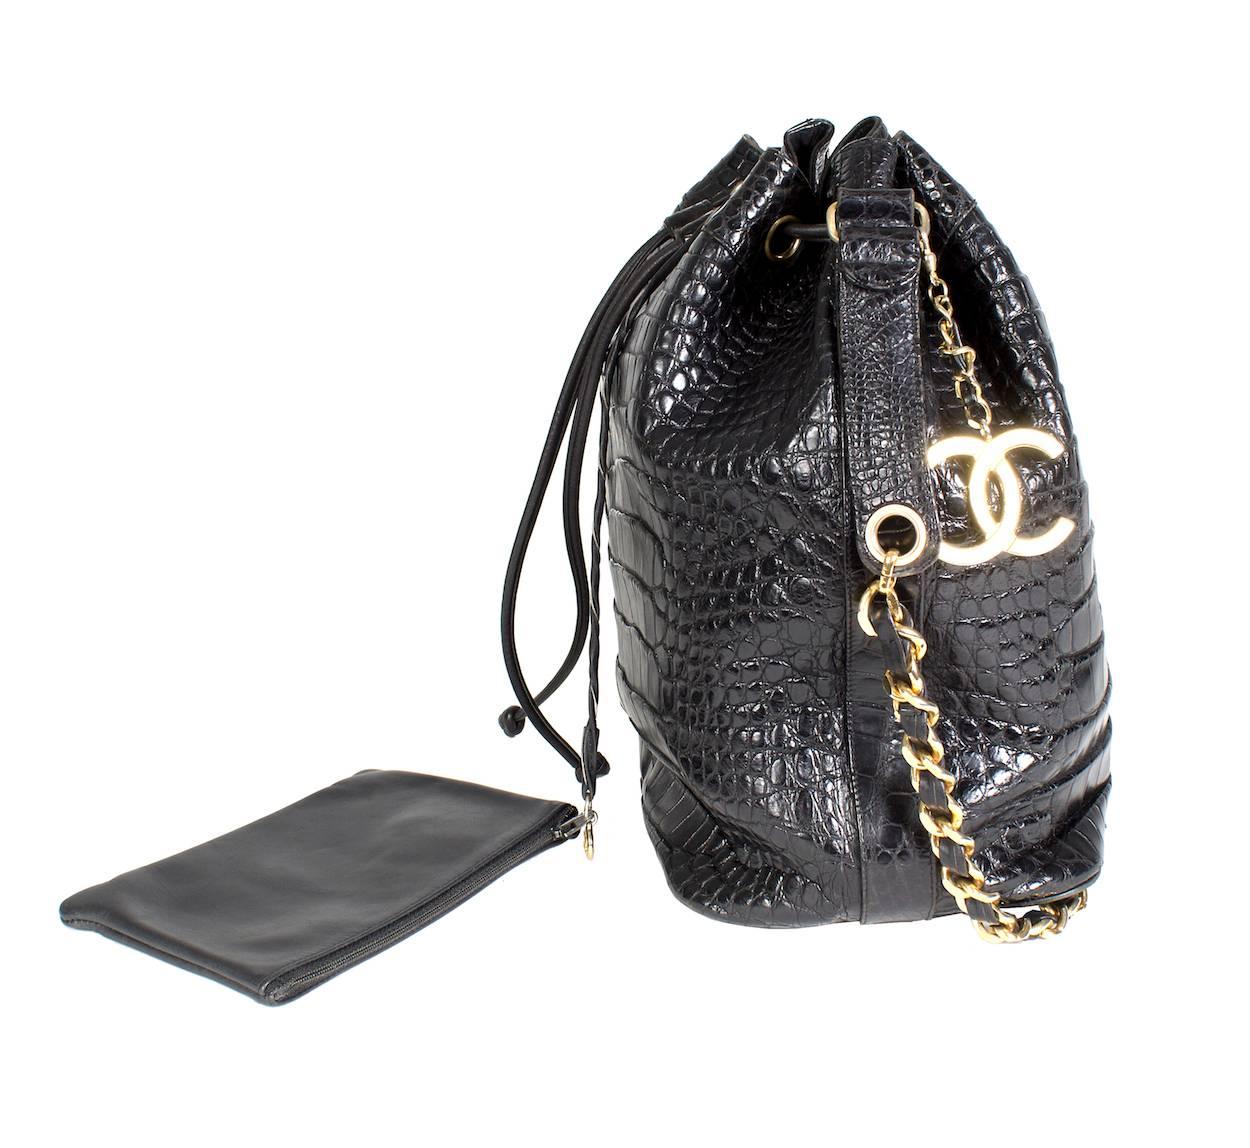 Black croc bucket bag by Chanel from 1990.  It features gold hardware and a leather drawstring closure on top.  It includes an attached leather wallet.  Rare/collectible item.

20